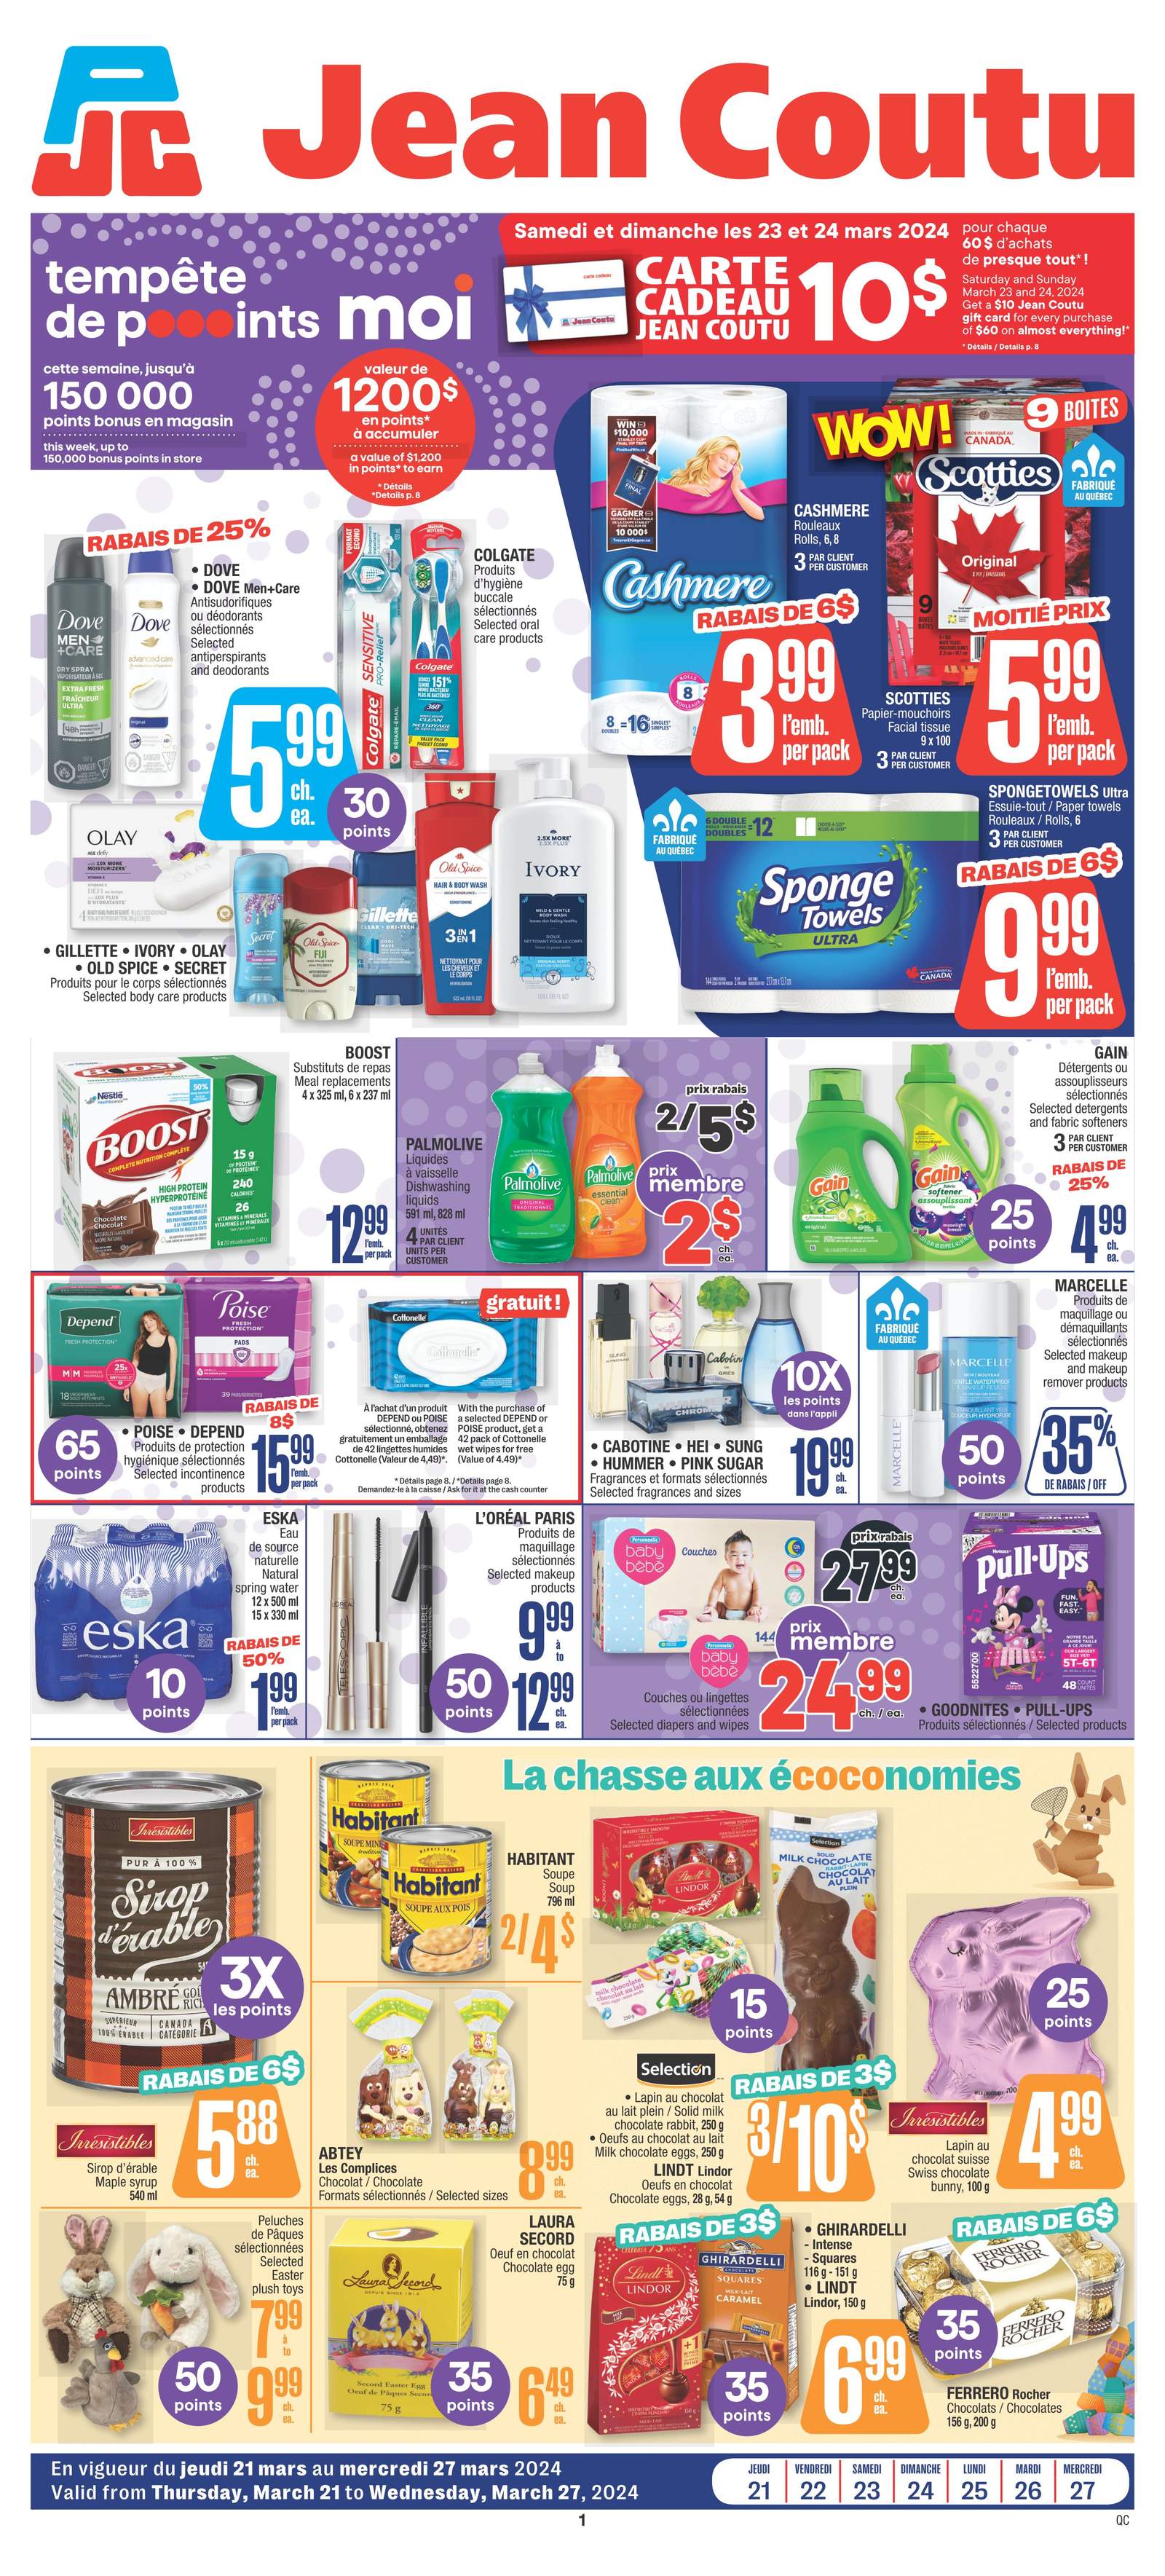 https://flyers.smartcanucks.ca/uploads/pages/238942/jean-coutu-qc-flyer-march-21-to-271-1.jpg